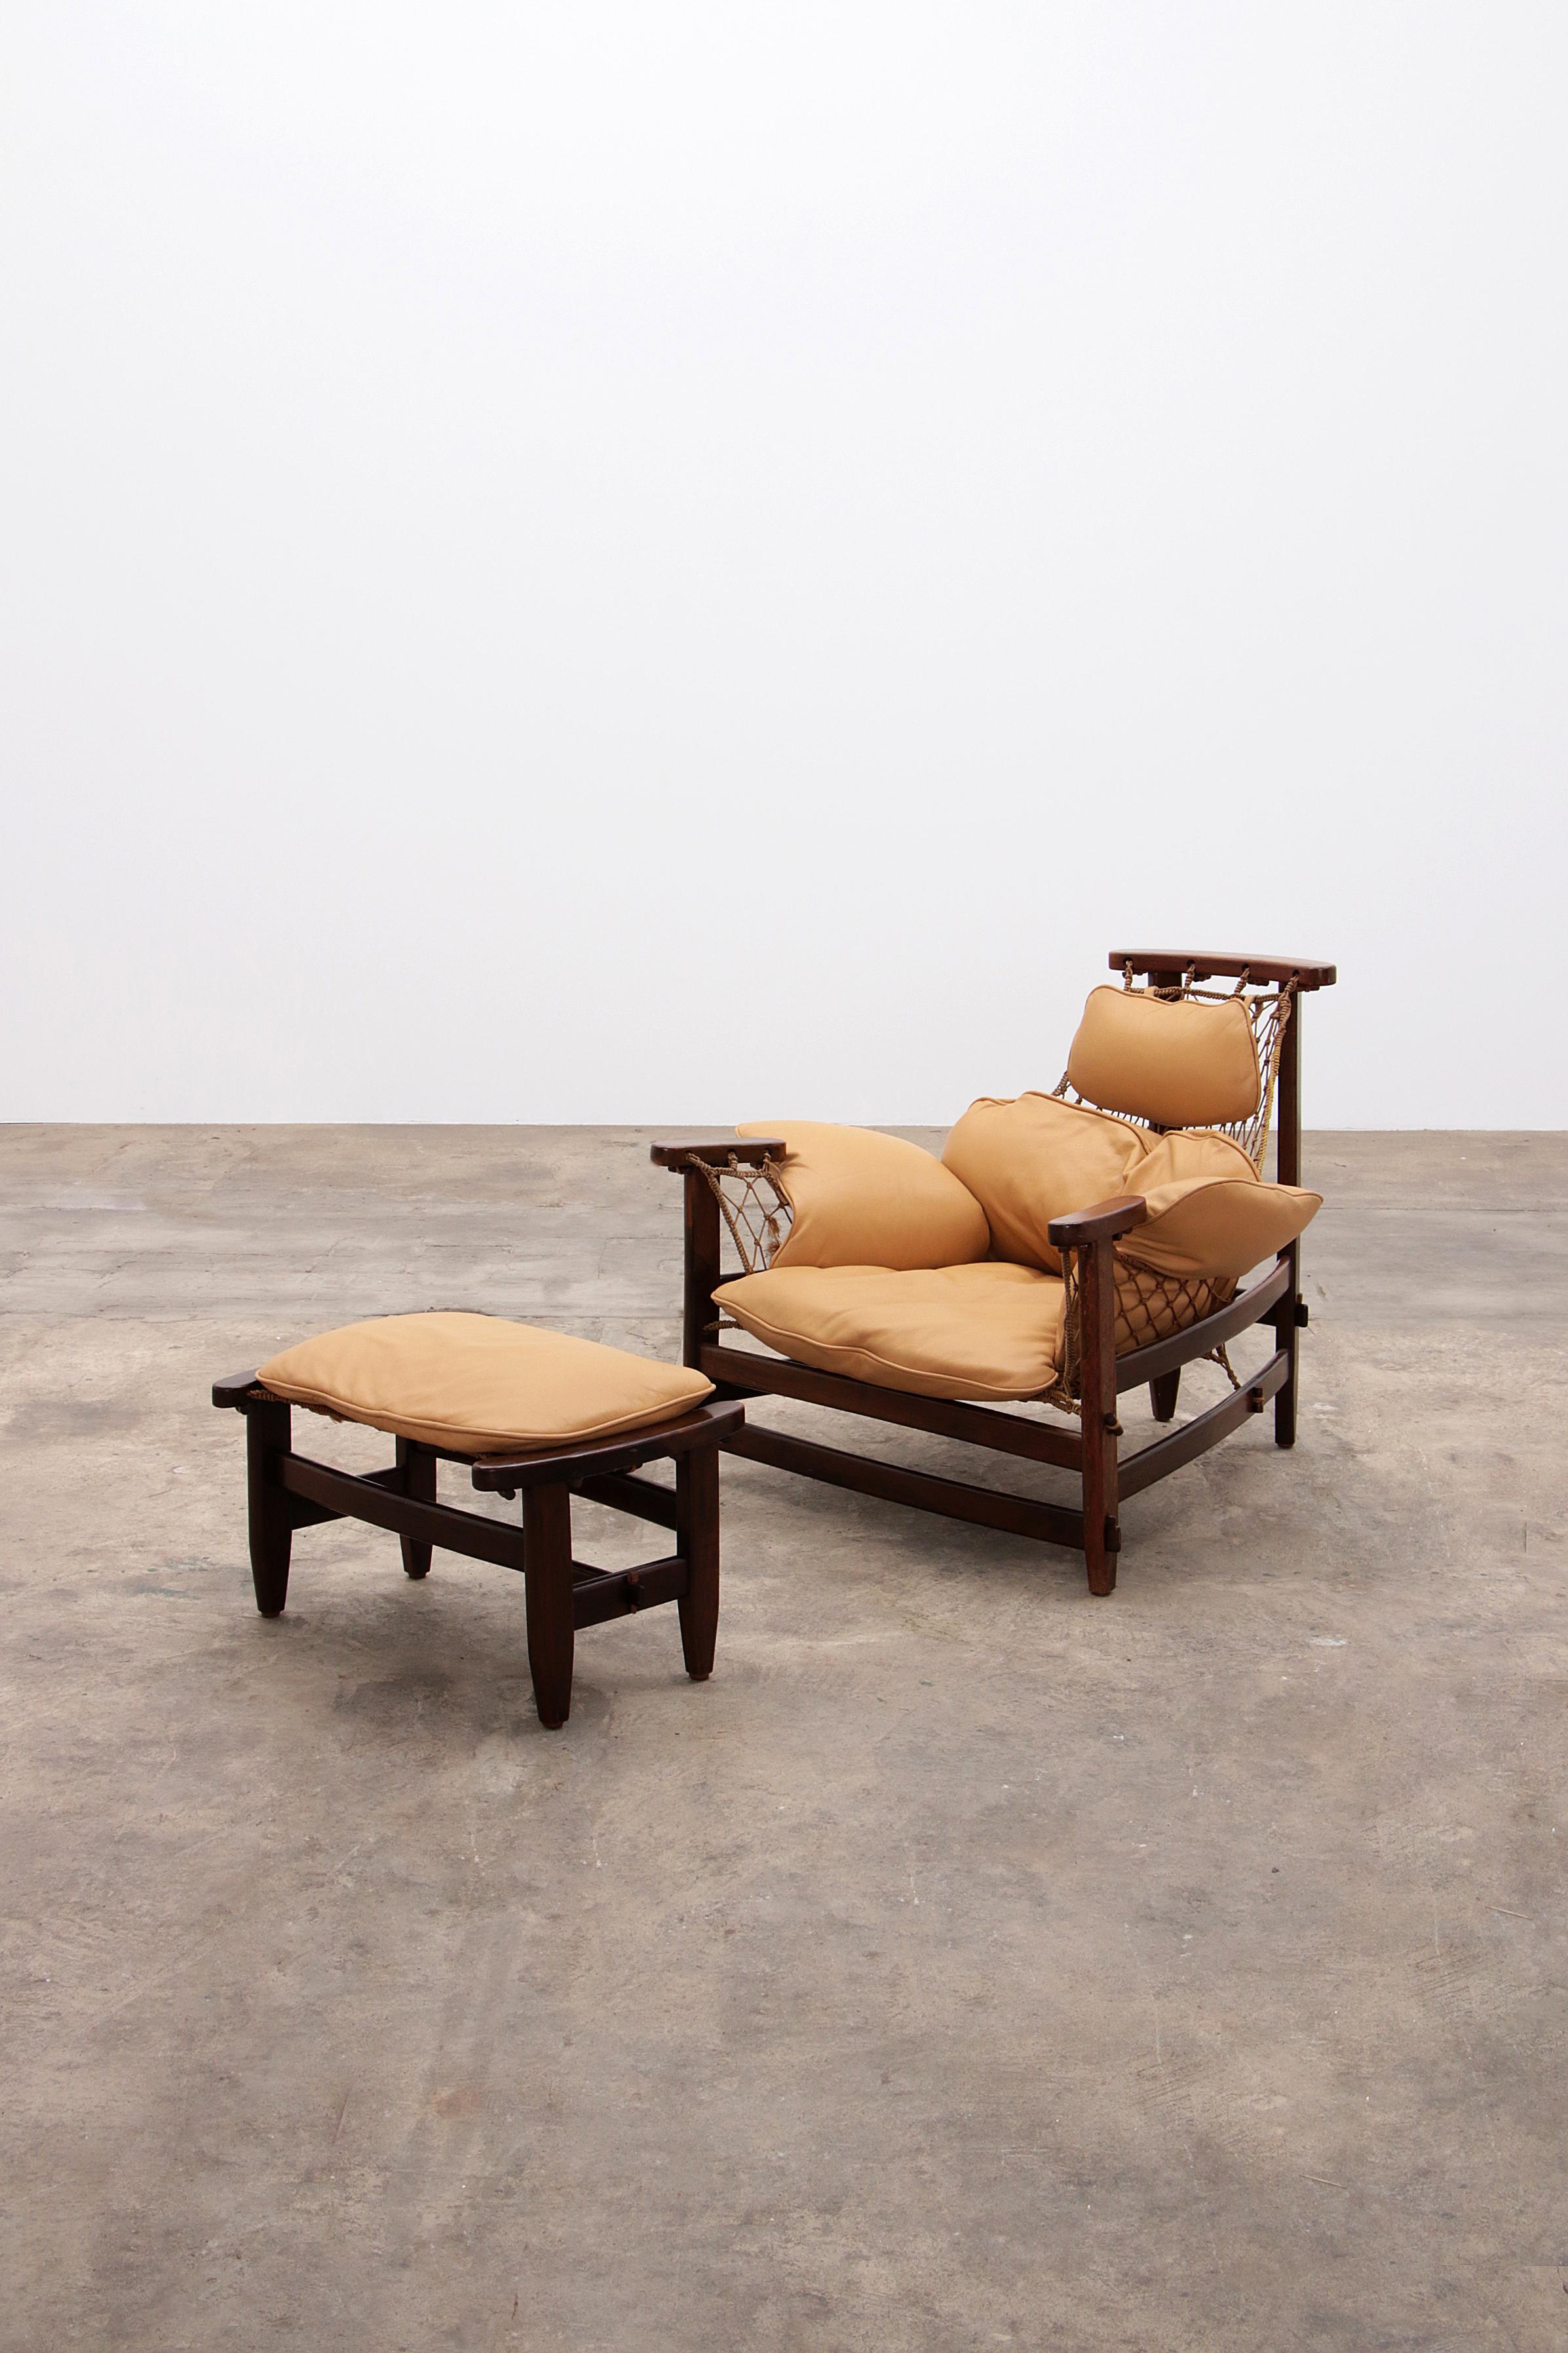 Jean Gillon 'Jangada' lounge chair and ottoman in tropical wood and leather, Brazil, ca. 1960s.

Designed by the iconic Jean Gillon, this chair and footstool was named the 'Jangada' chair after the small, rustic fishing boats used by fishermen along